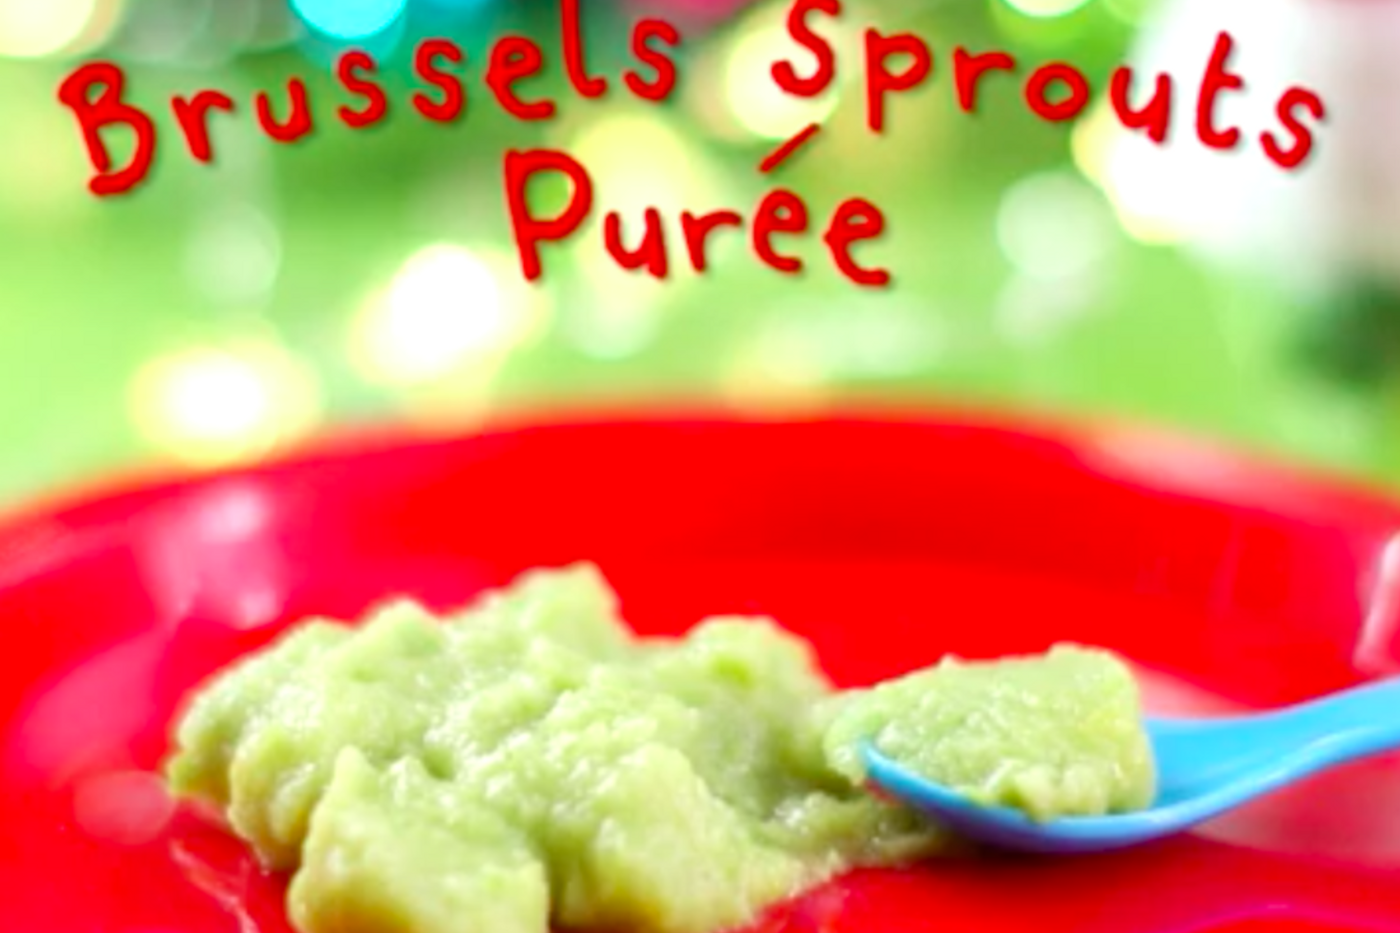 Brussel Sprouts Puree